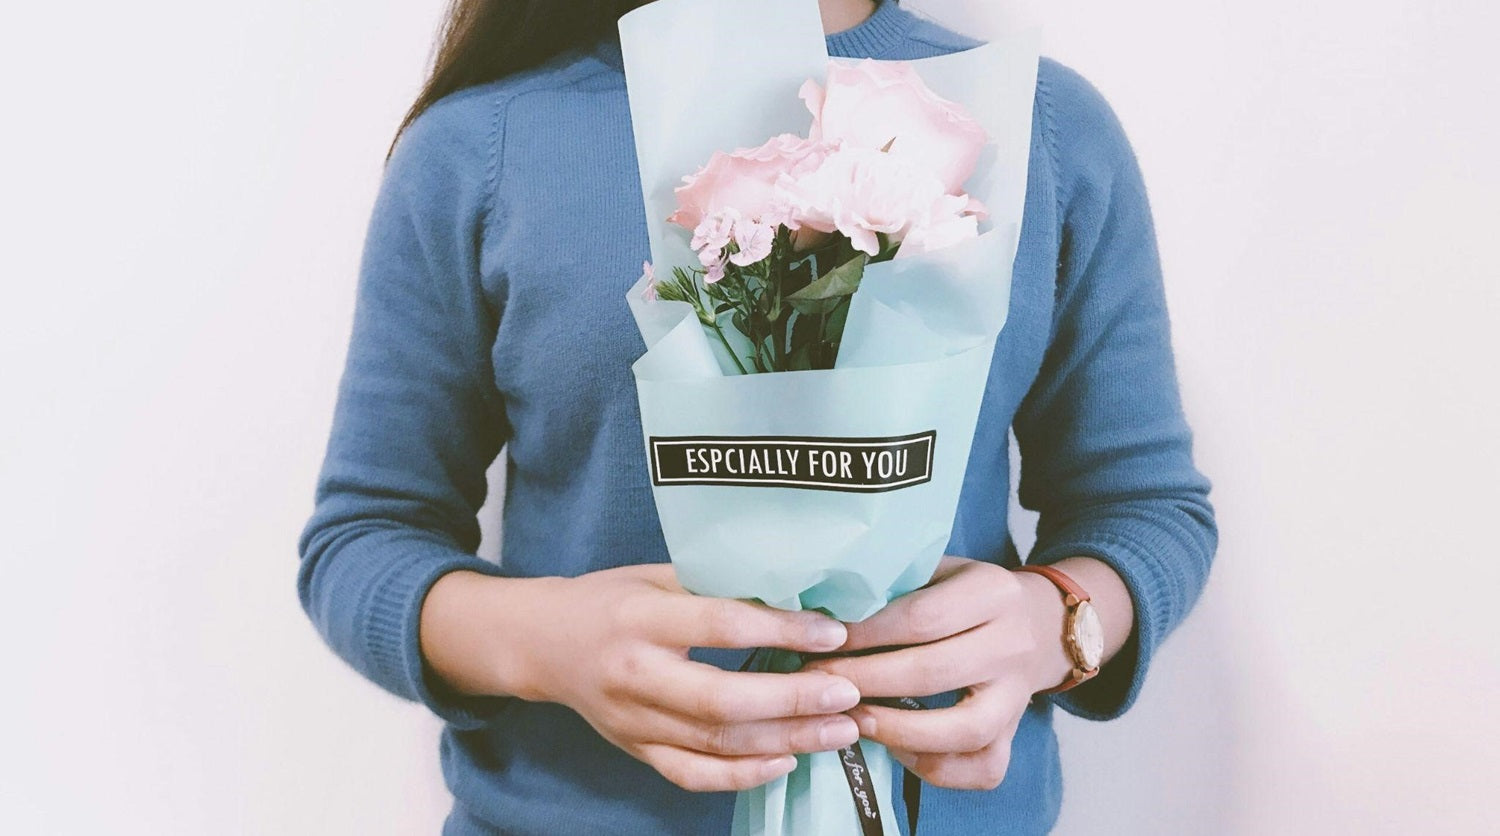 Female employee holding bouquet of pink flowers